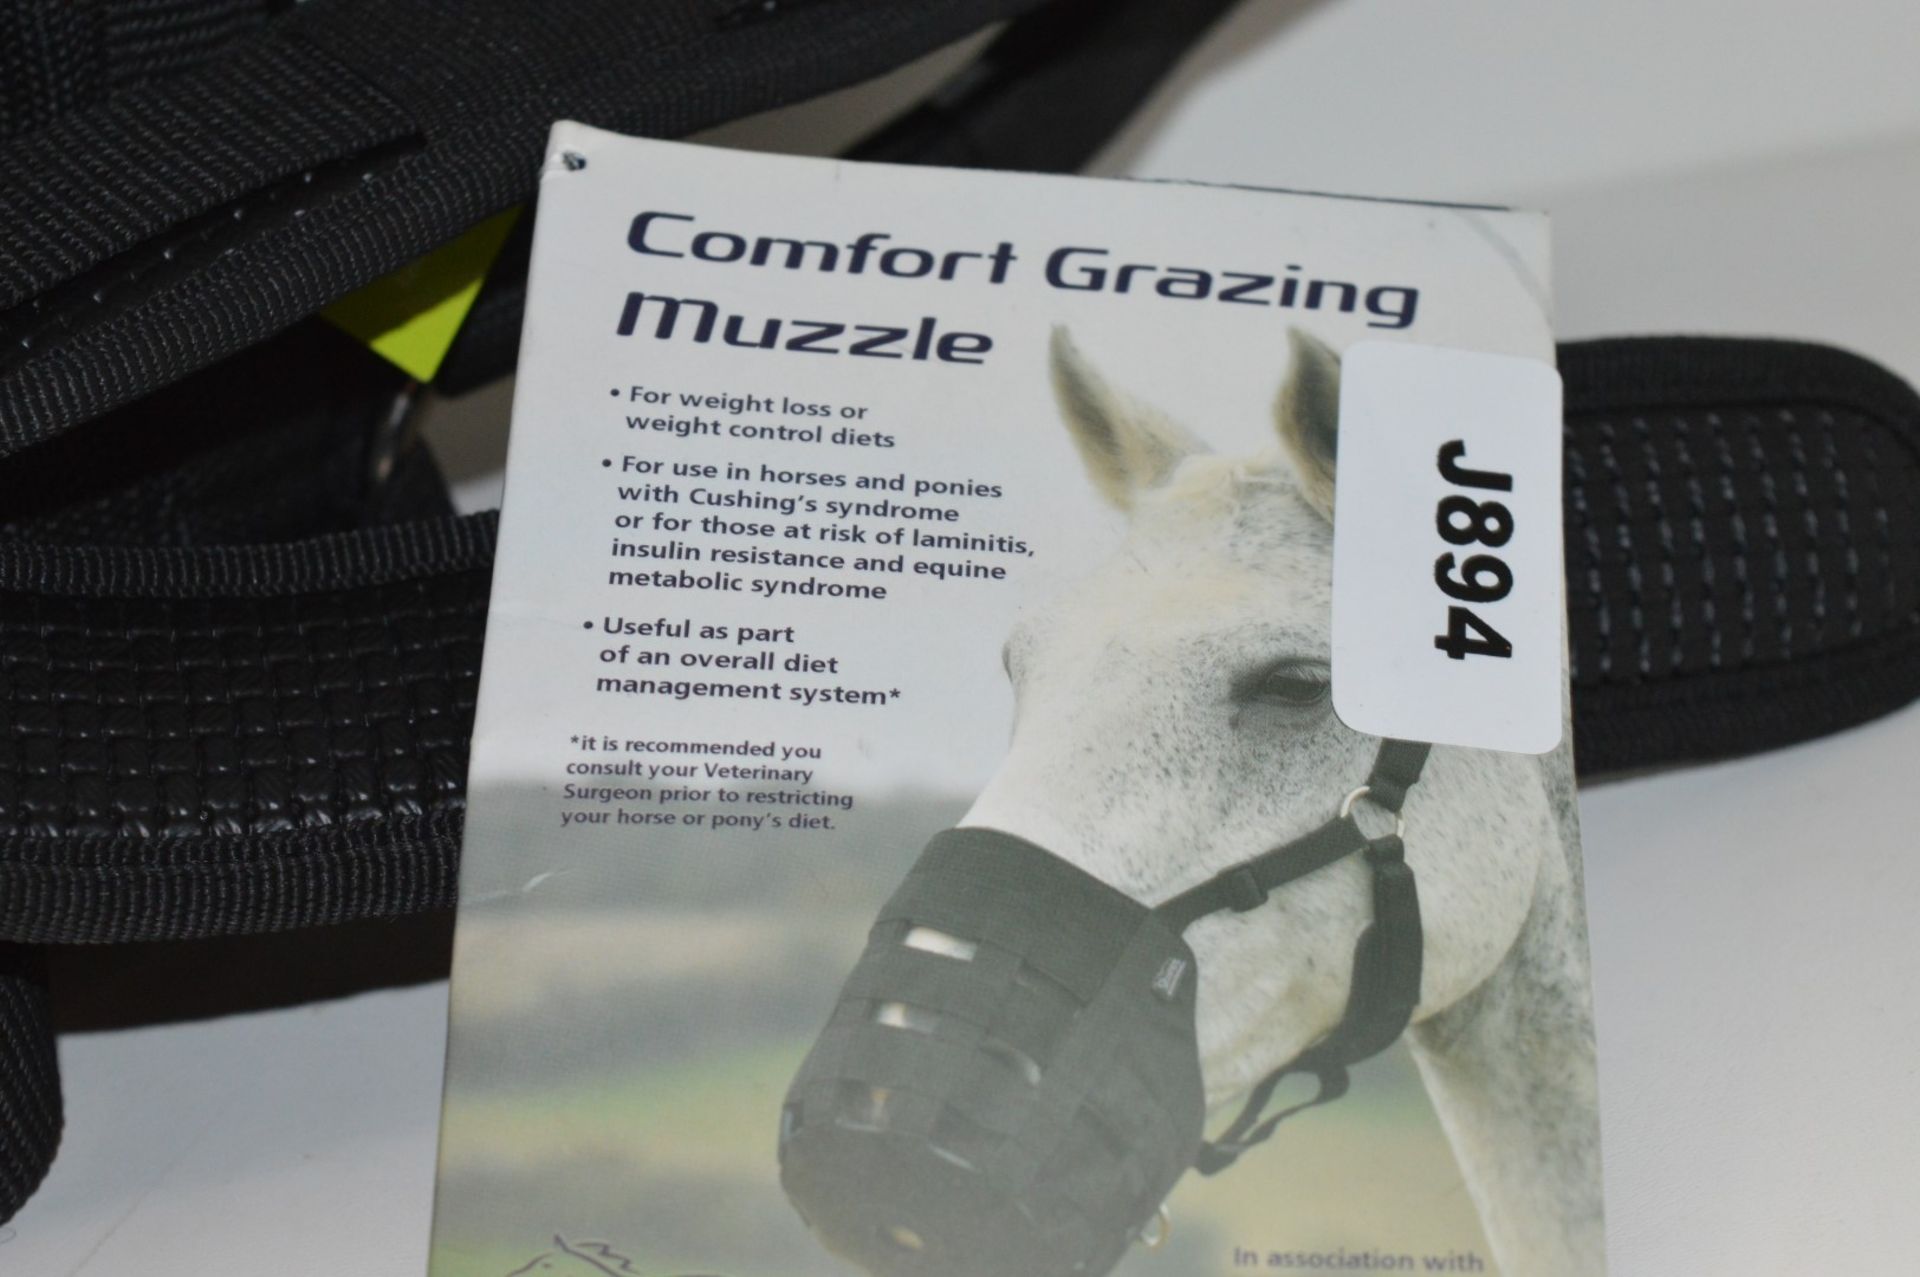 1 x Shires Comfort Grazing Muzzle - Full Size 495N Black - New Stock - CL401 - Ref J894 - - Image 3 of 4